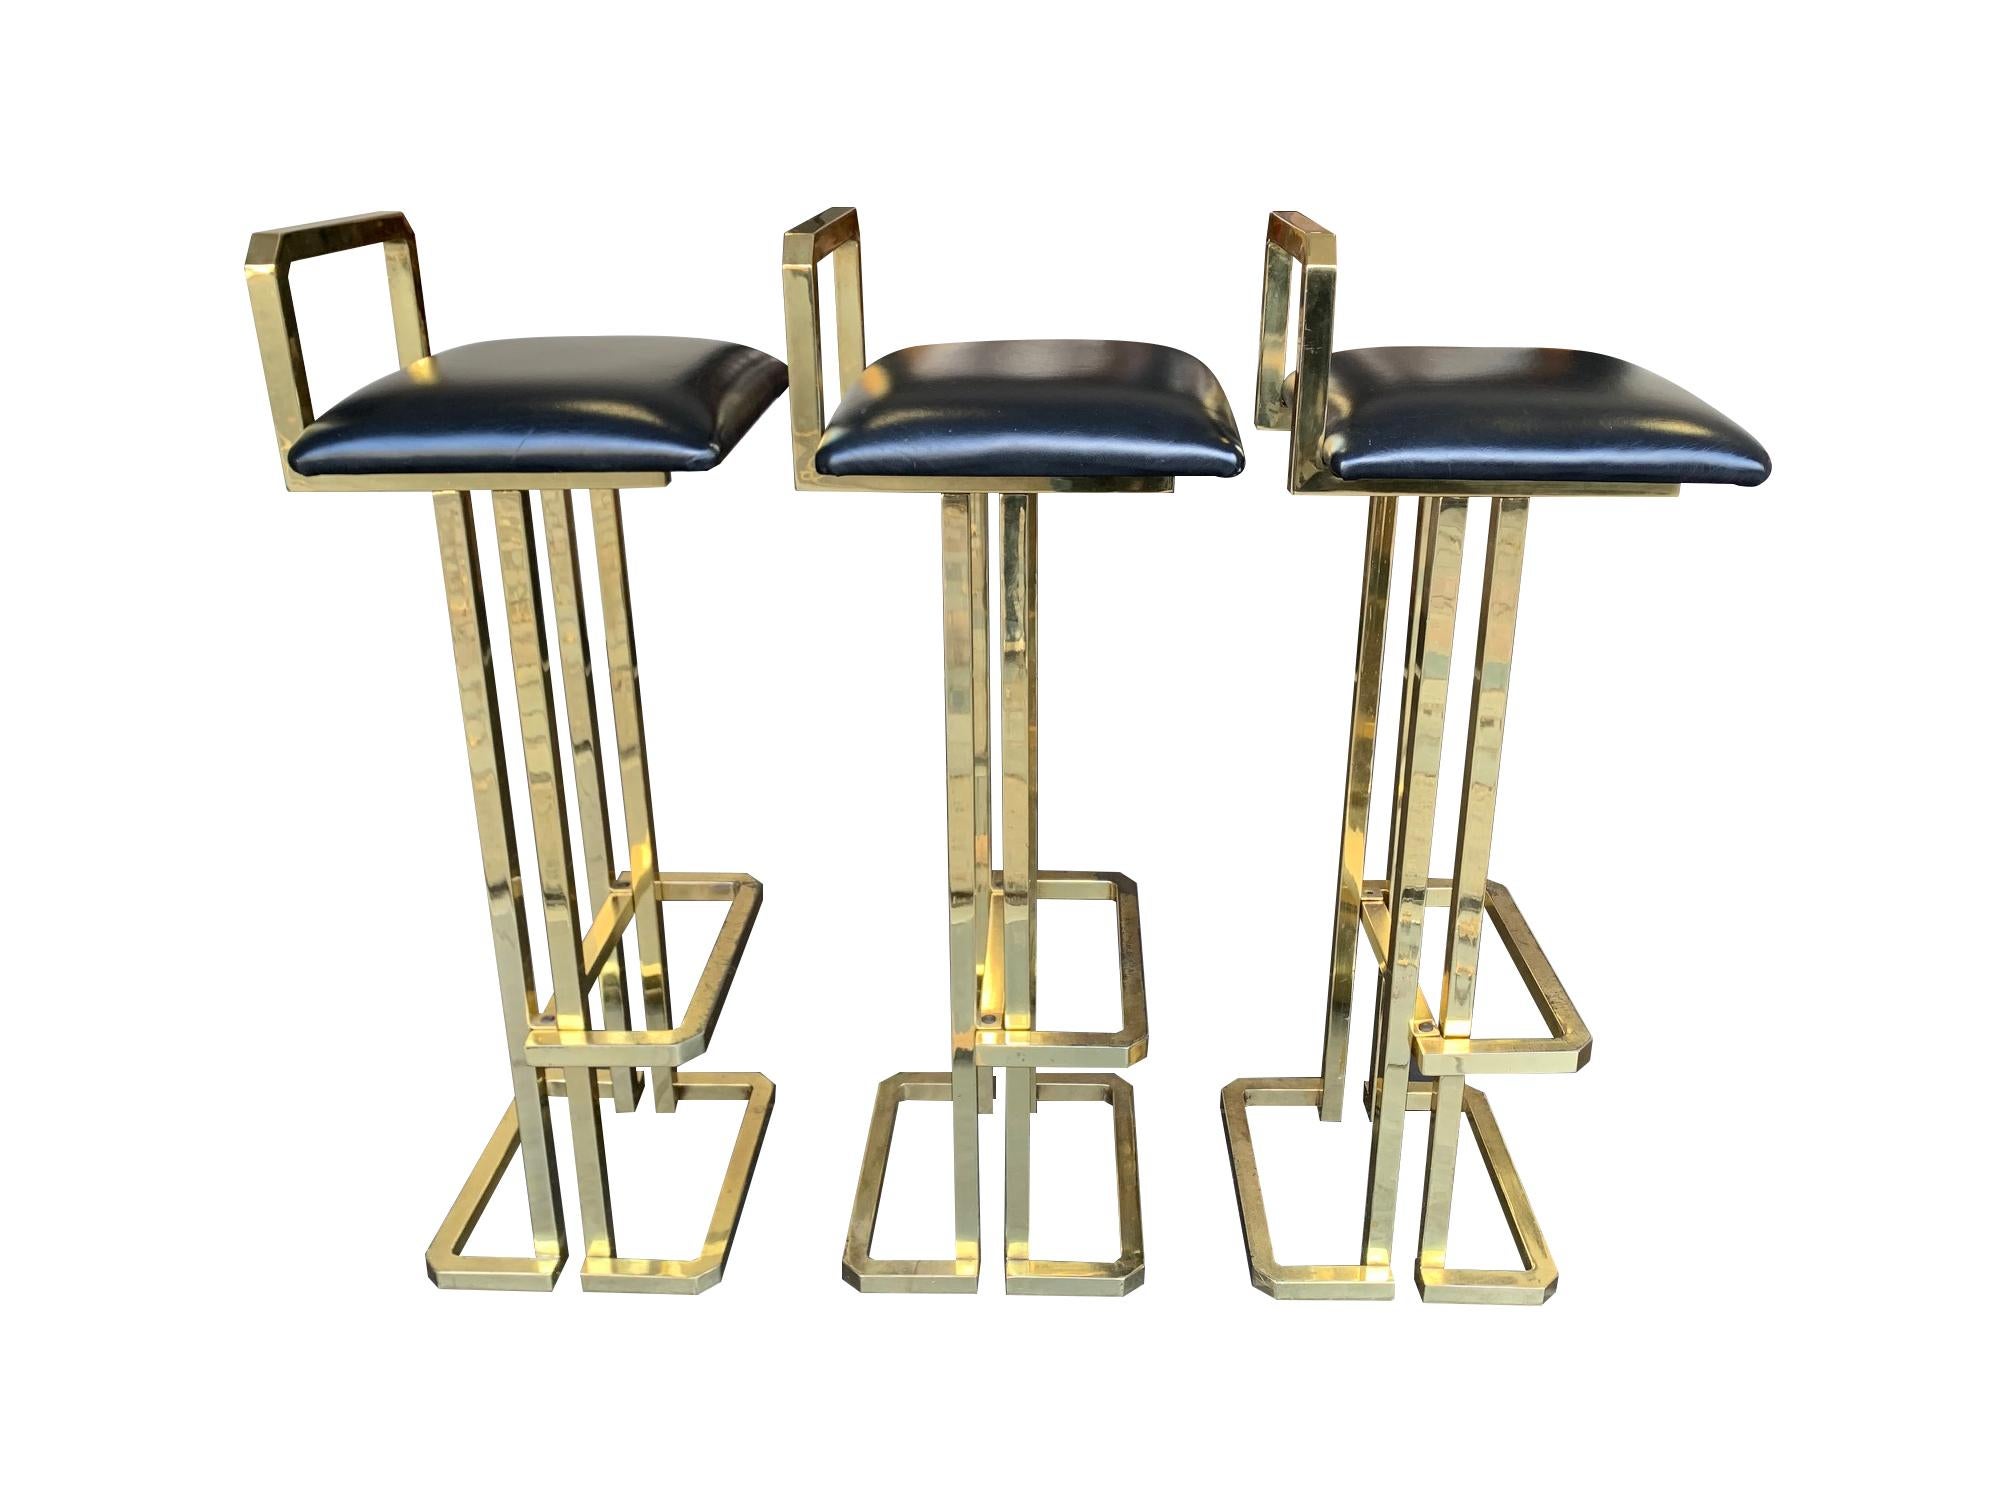 Set of 3 Maison Jansen Style Gilt Metal Stools with Black Leather Seat Pads For Sale 10